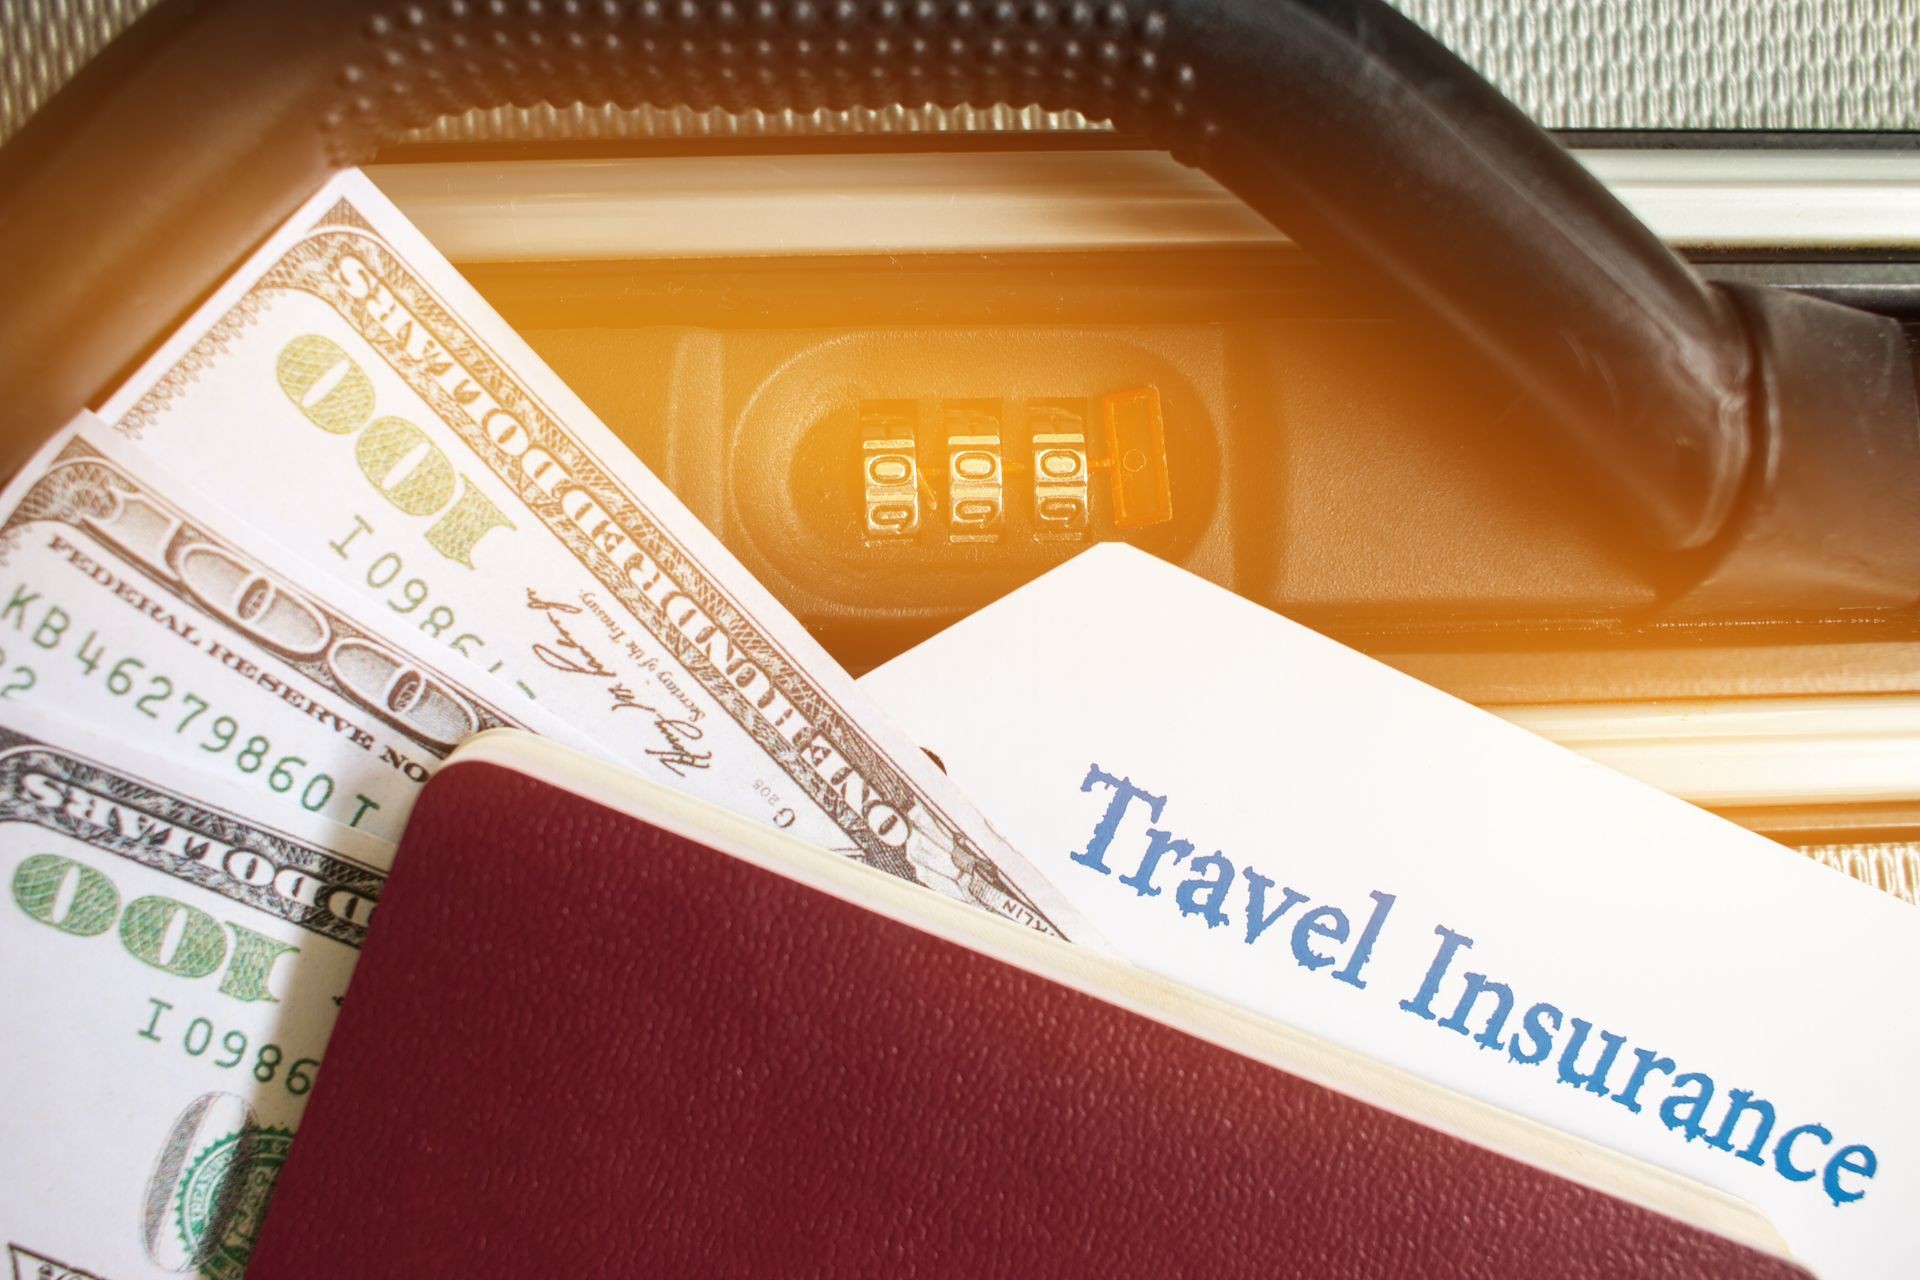 Travel Insurance tag on suitcase near numeric combination lock,passport and US Dollar. Travel Insurance is intended cover medical expenses,cover lost luggage flight cancellation or accident